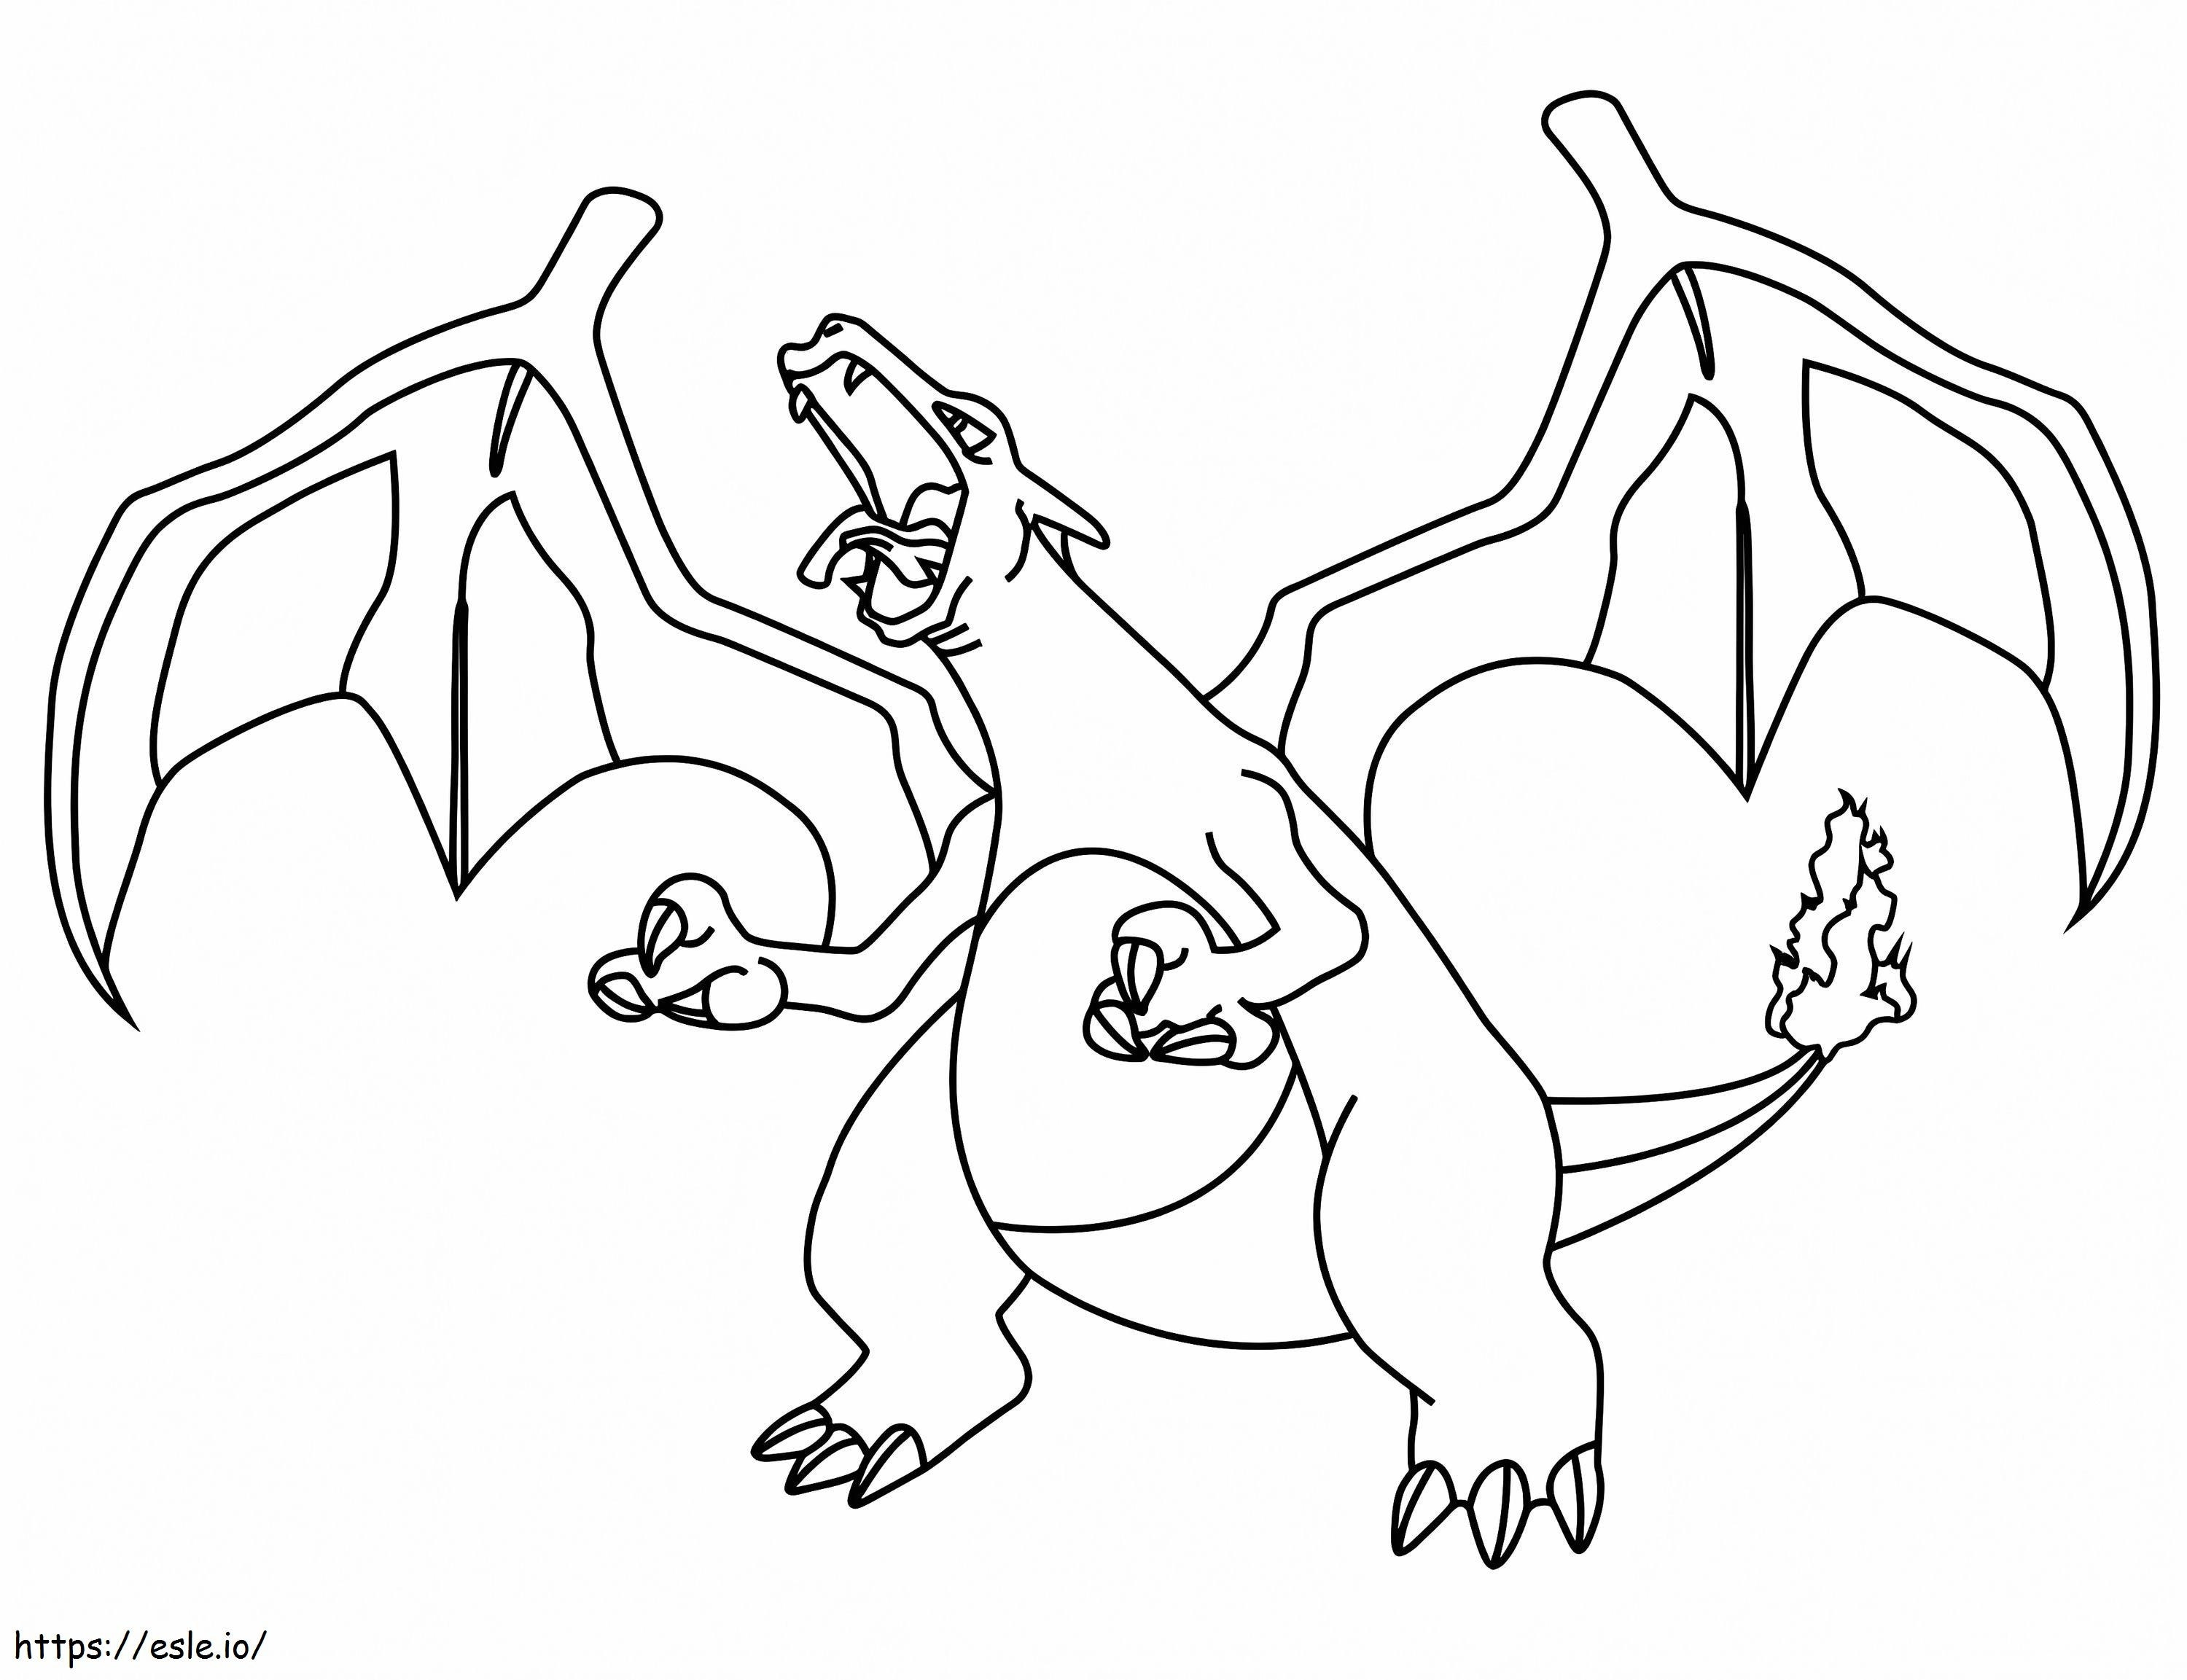 Charizard Gets Angry coloring page